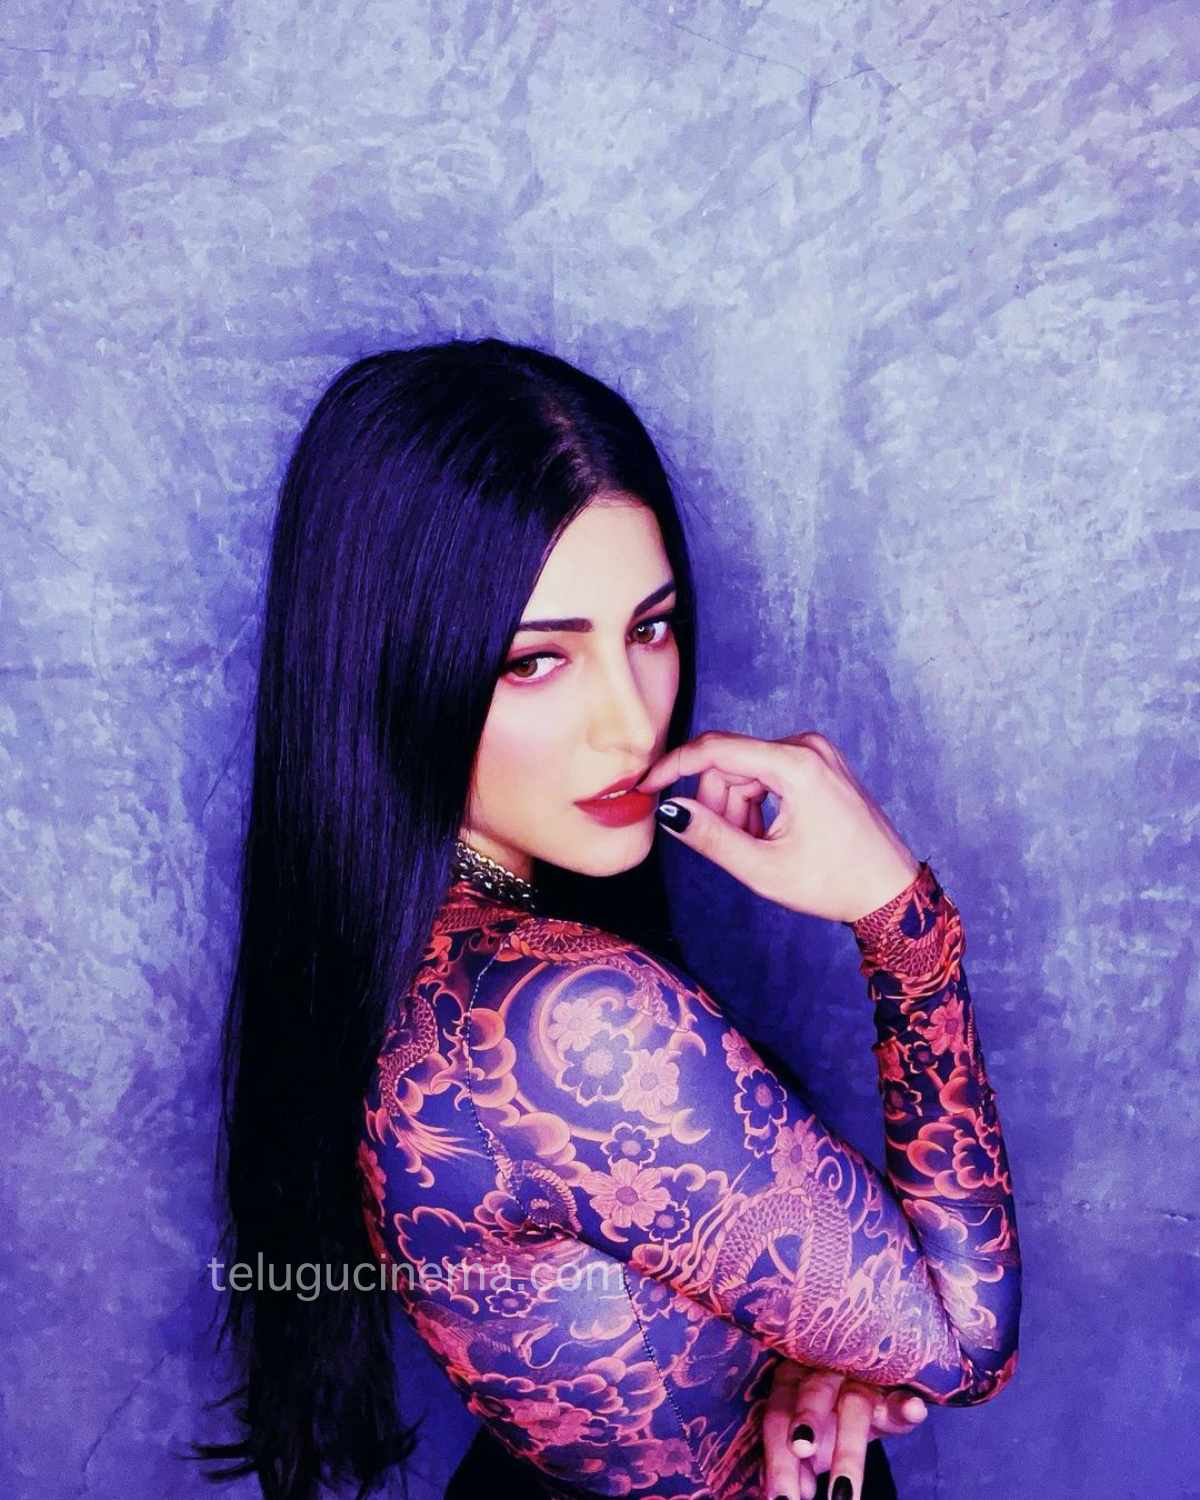 Shruti Haasan Shares A Photo Of A Fan Page Looking Breathtakingly Gorgeous